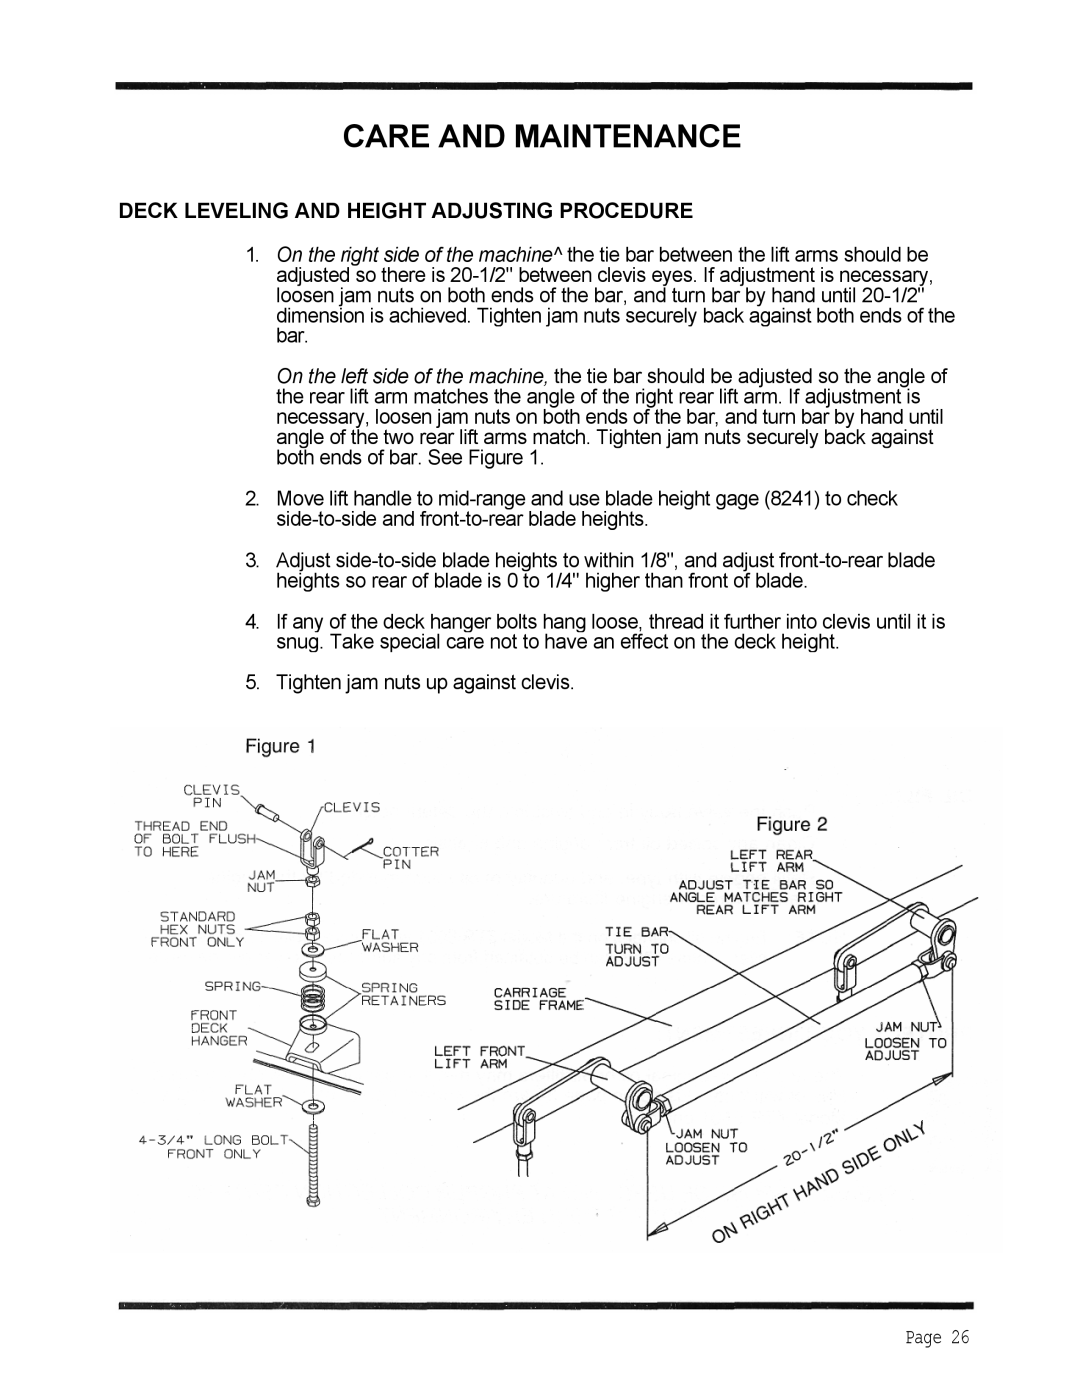 Dixon 6601 Series manual Care And Maintenance, Deck Leveling And Height Adjusting Procedure, Page 